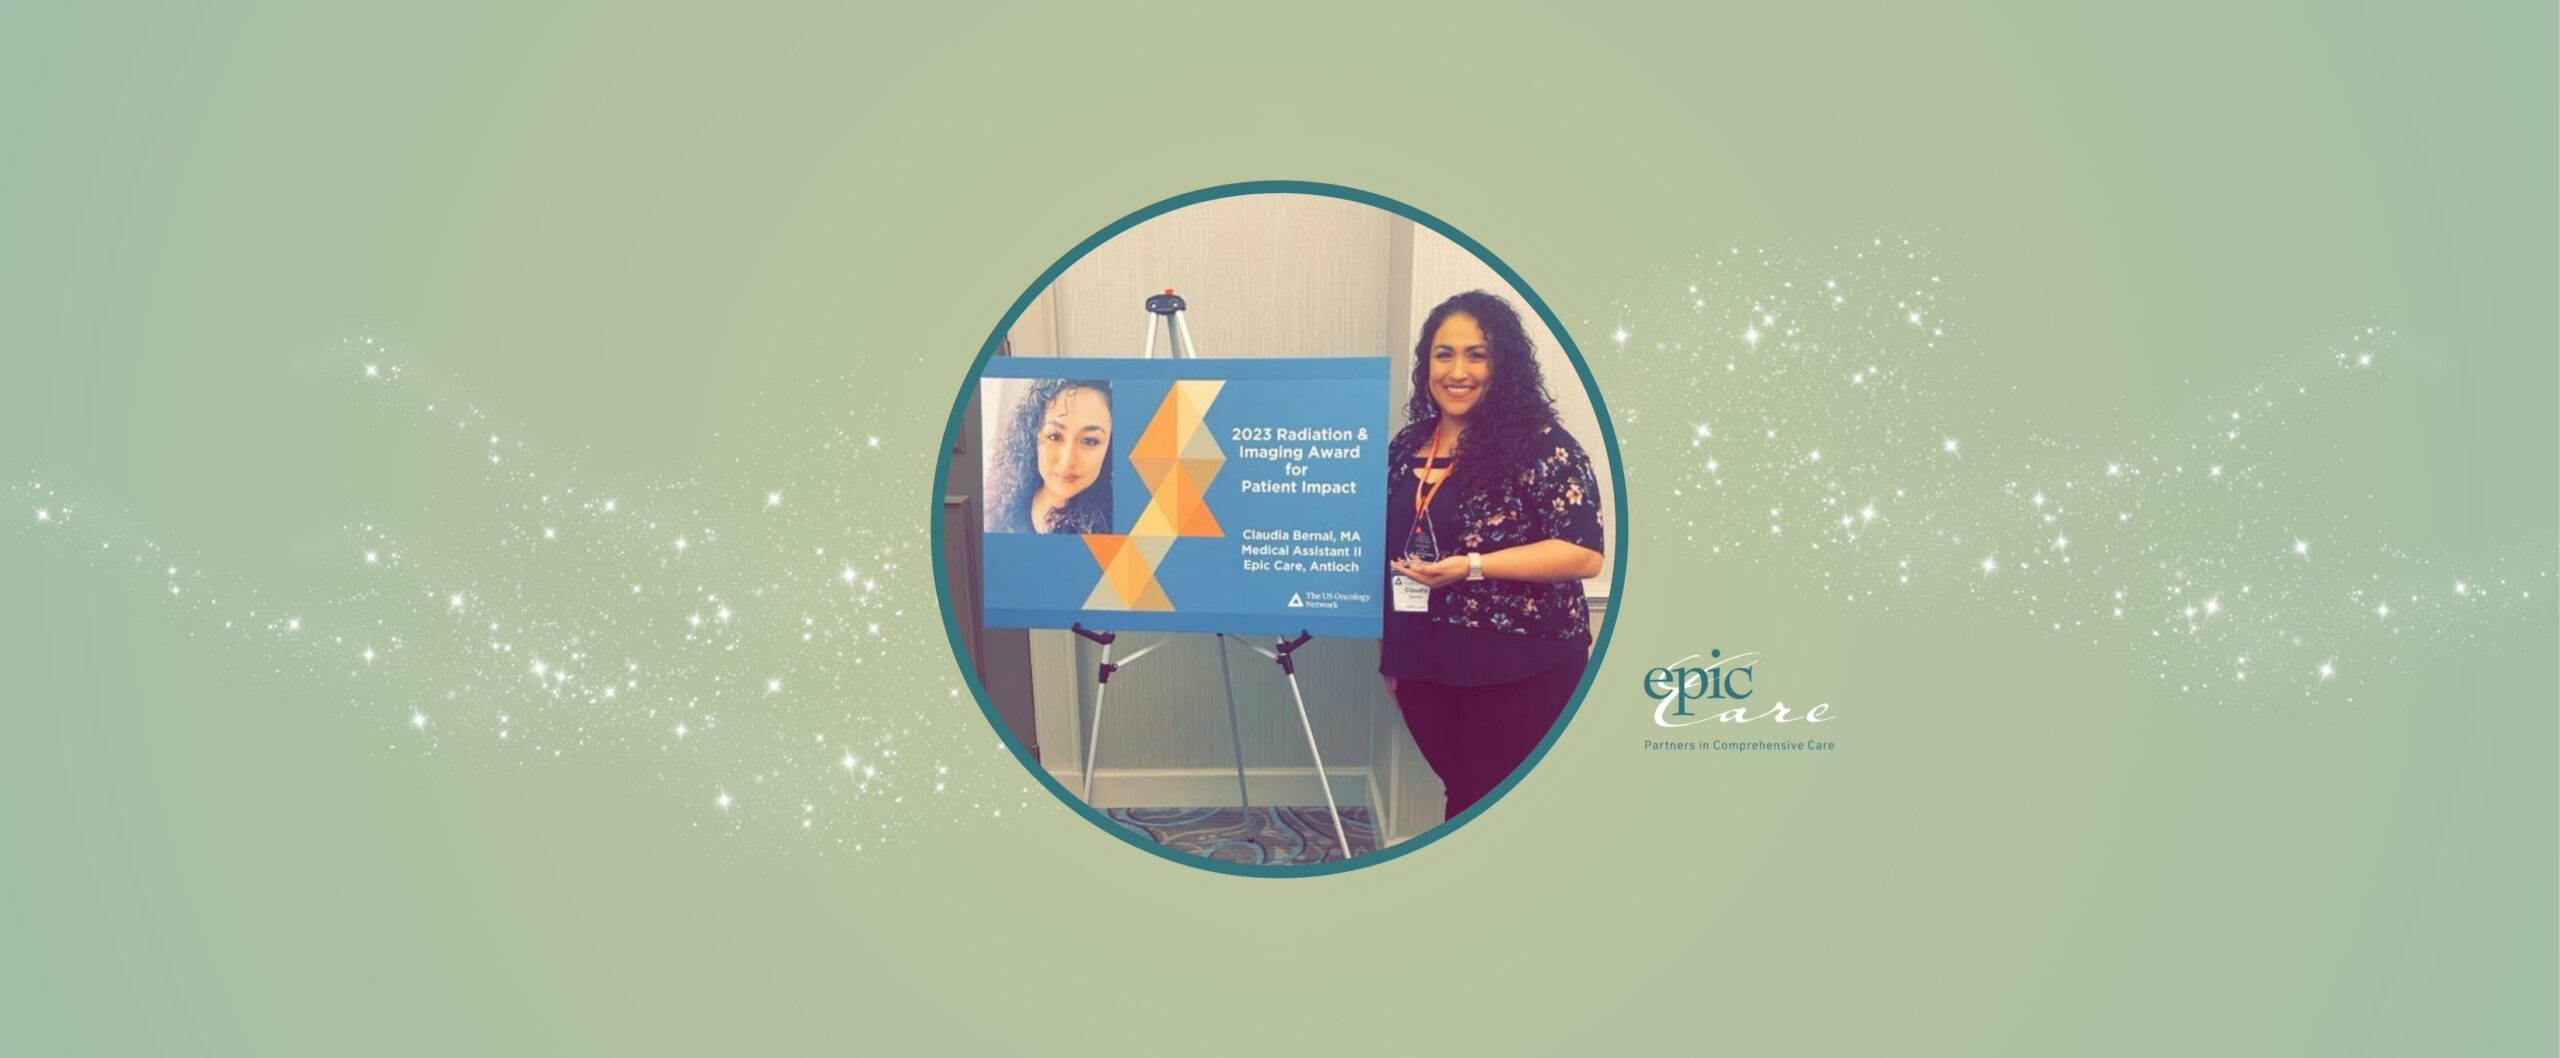 Epic Care’s Claudia Bernal Awarded The US Oncology Network 2023 Radiation & Imaging Patient Impact Award